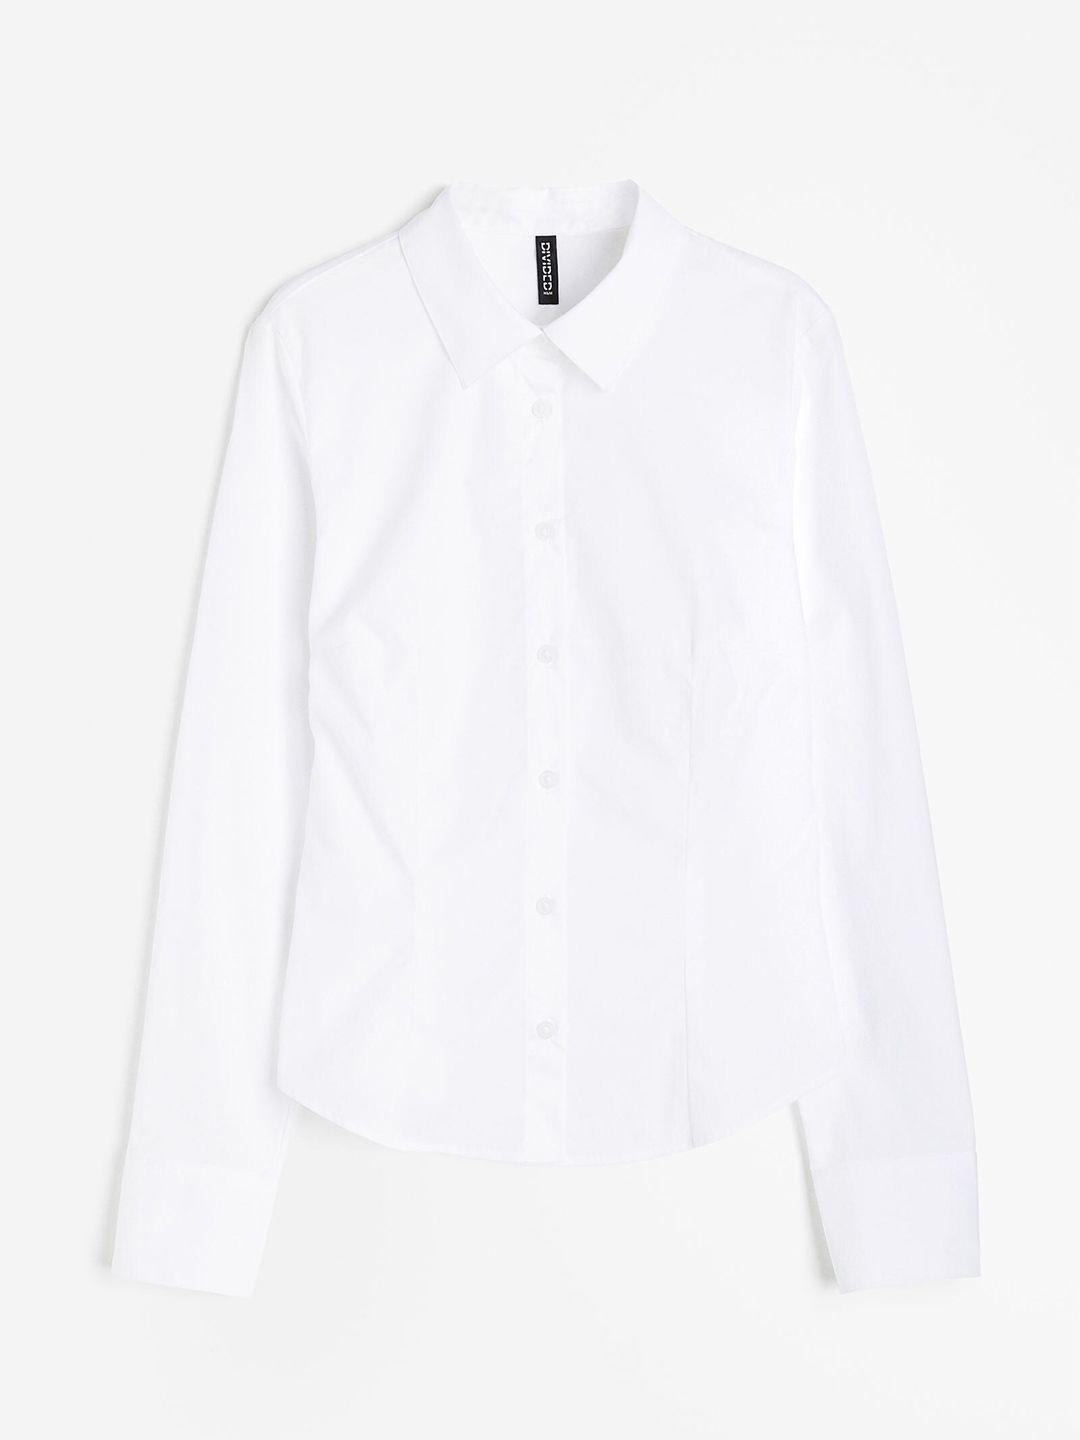 h&m-pure-cotton-fitted-poplin-shirt